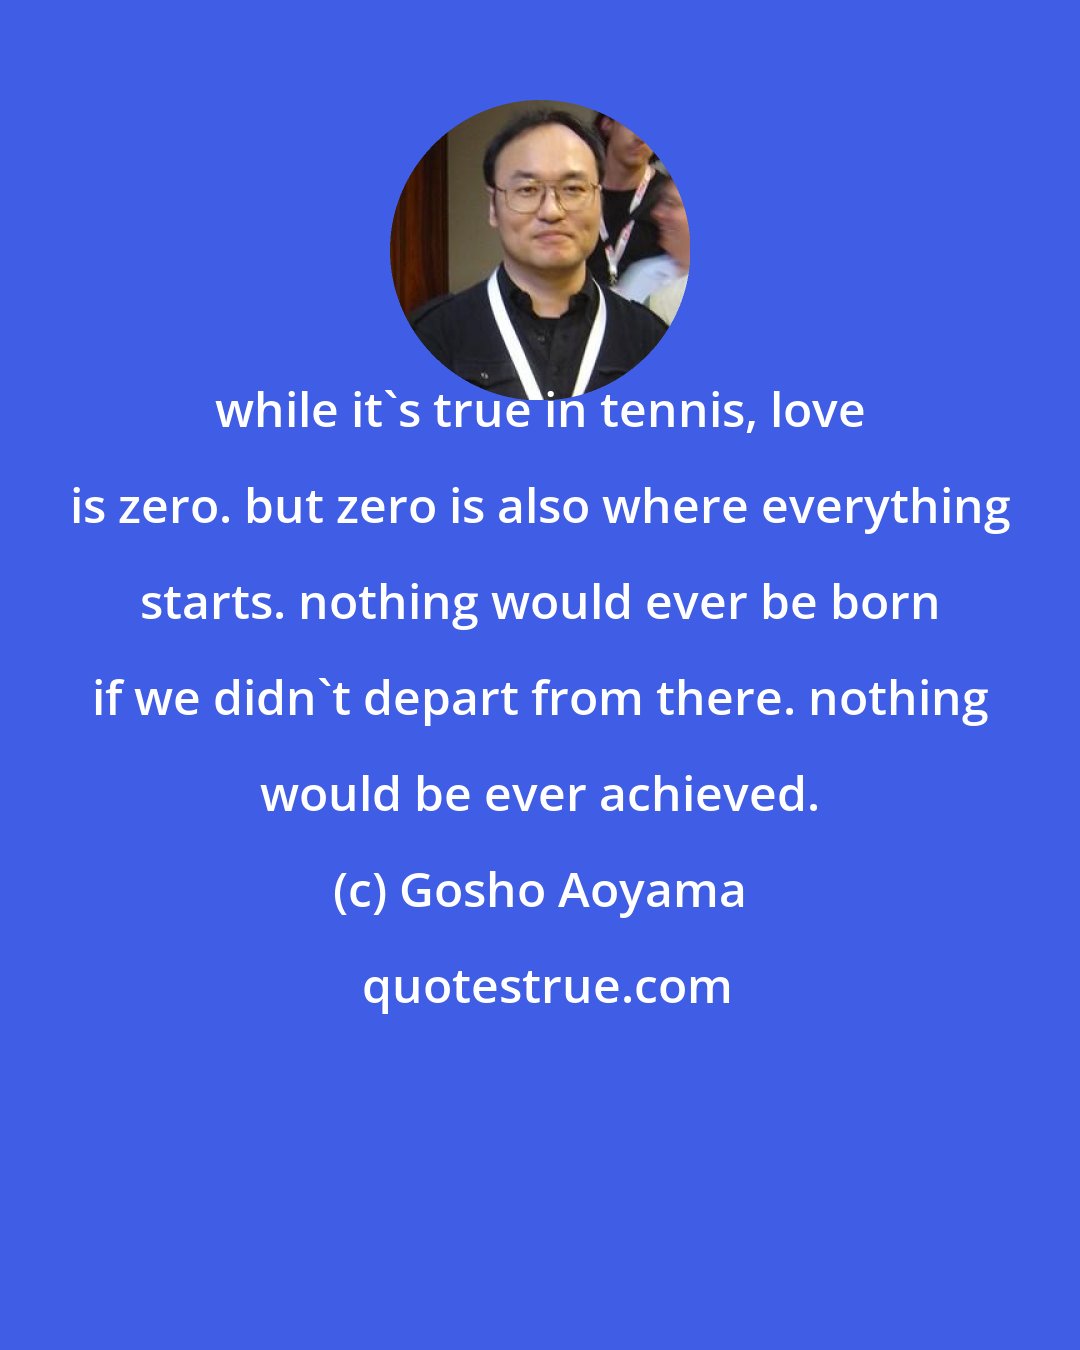 Gosho Aoyama: while it's true in tennis, love is zero. but zero is also where everything starts. nothing would ever be born if we didn't depart from there. nothing would be ever achieved.